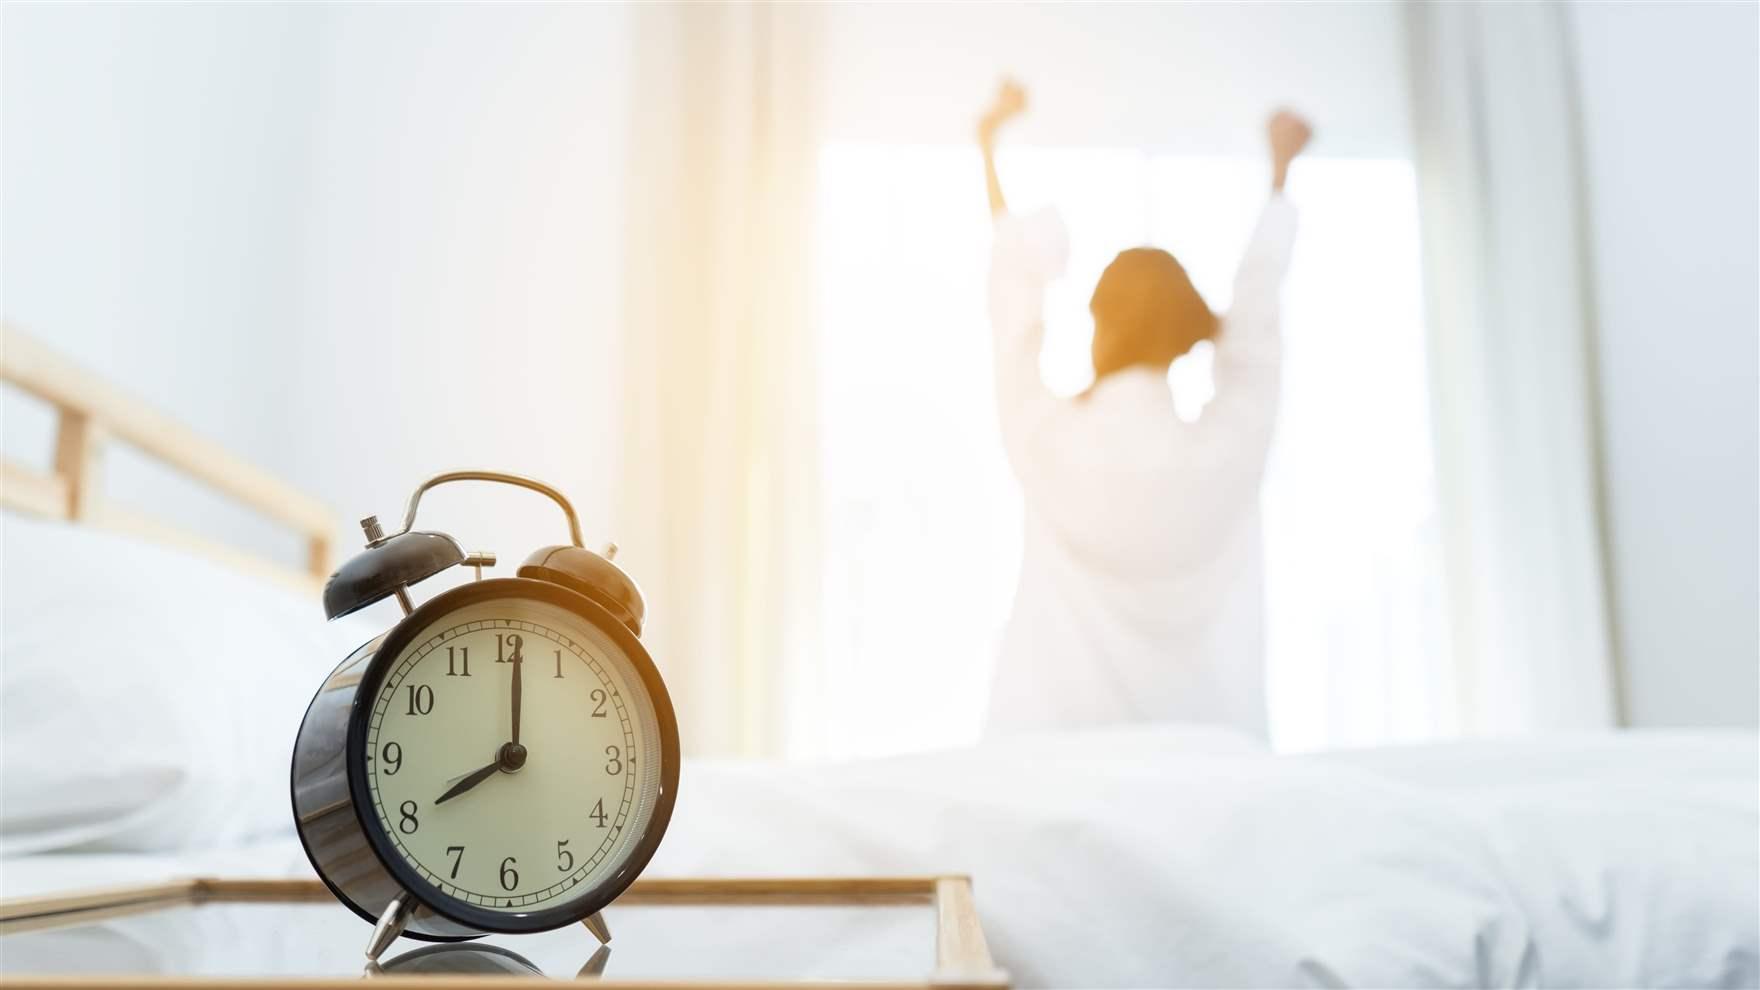 Close-up of an alarm clock as a woman wakes up in the morning and is sitting on the bed at mirror door side relaxing with sunlight.